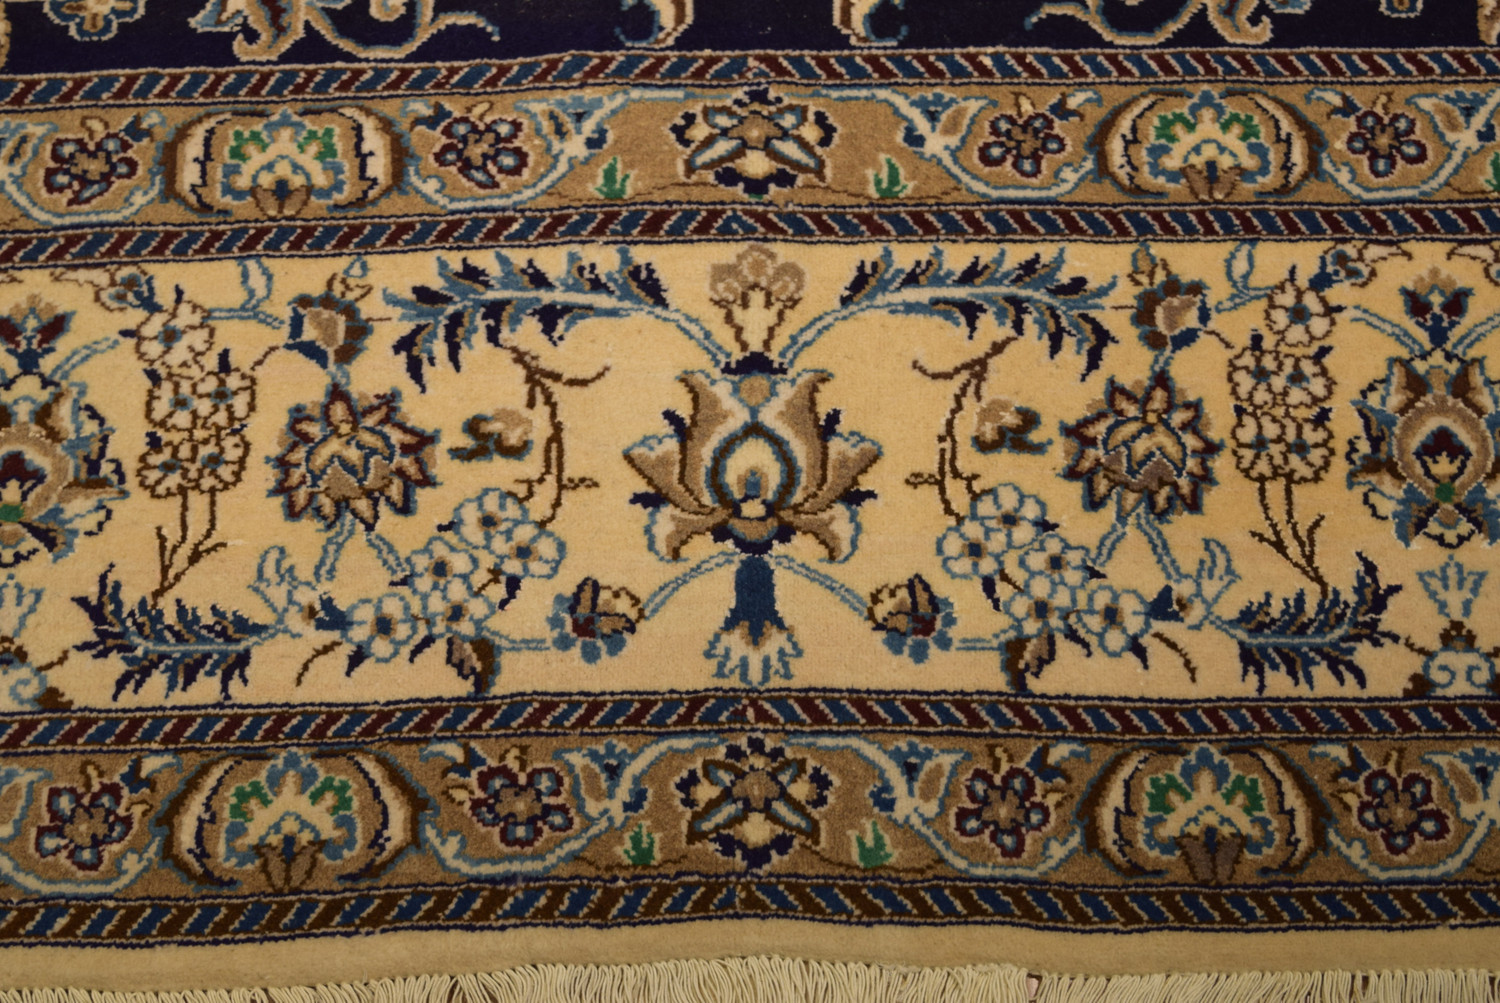 Detailed border and fringe of a Persian Nain rug highlighting the exquisite floral patterns.